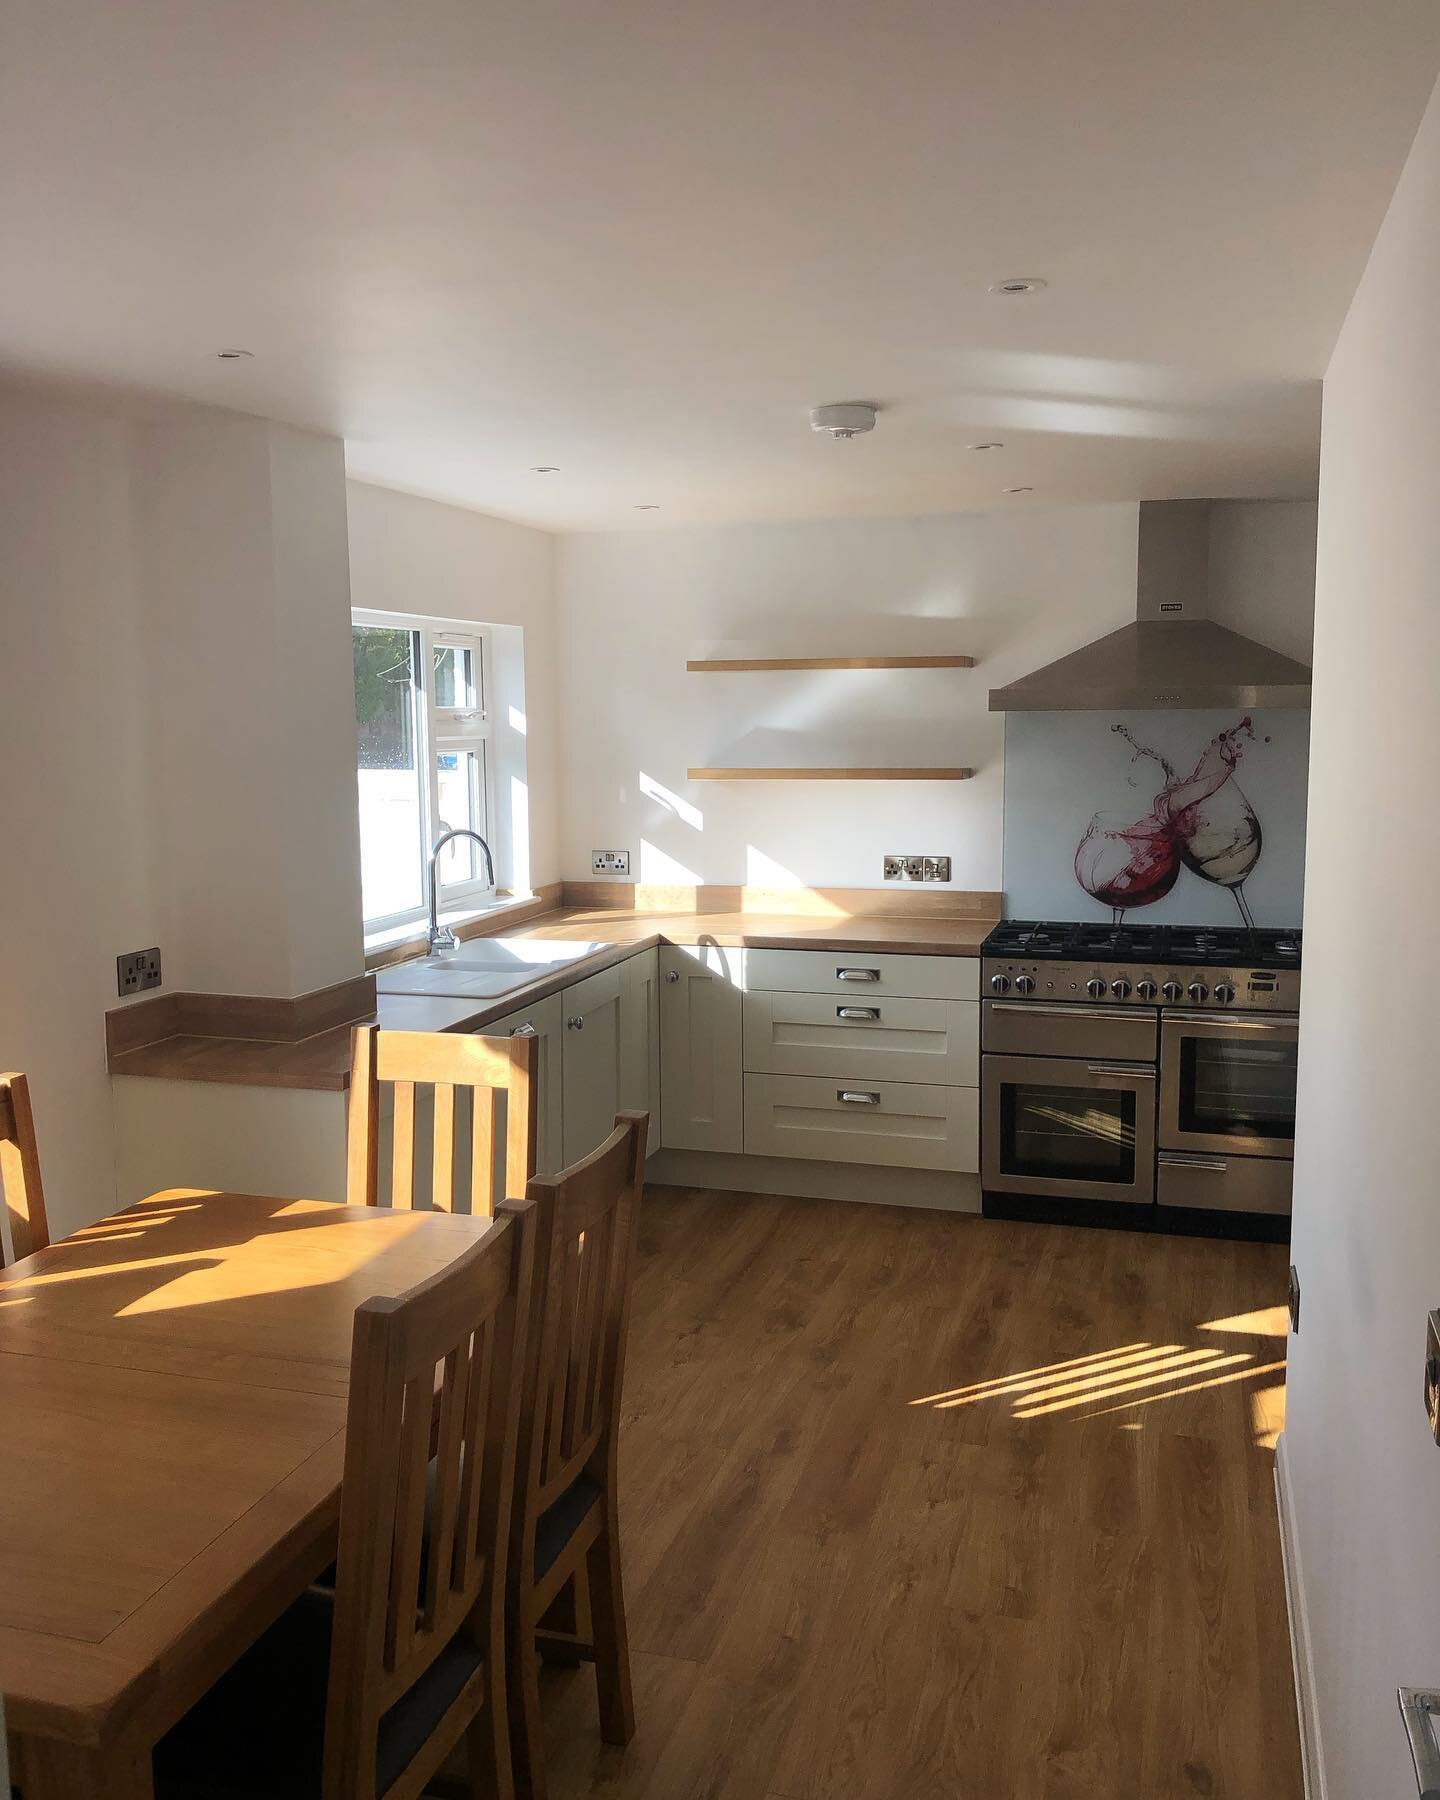 Kitchen extension complete ✅ and it looks amazing . Another great job from the team.👏🏽👏🏽 @exetercarpentrysolutions @mph321 @leeroweplumbingandheating @mashton_plastering #extensions #garageconversion  #kitchendesign #kitchenextension #openplanliv